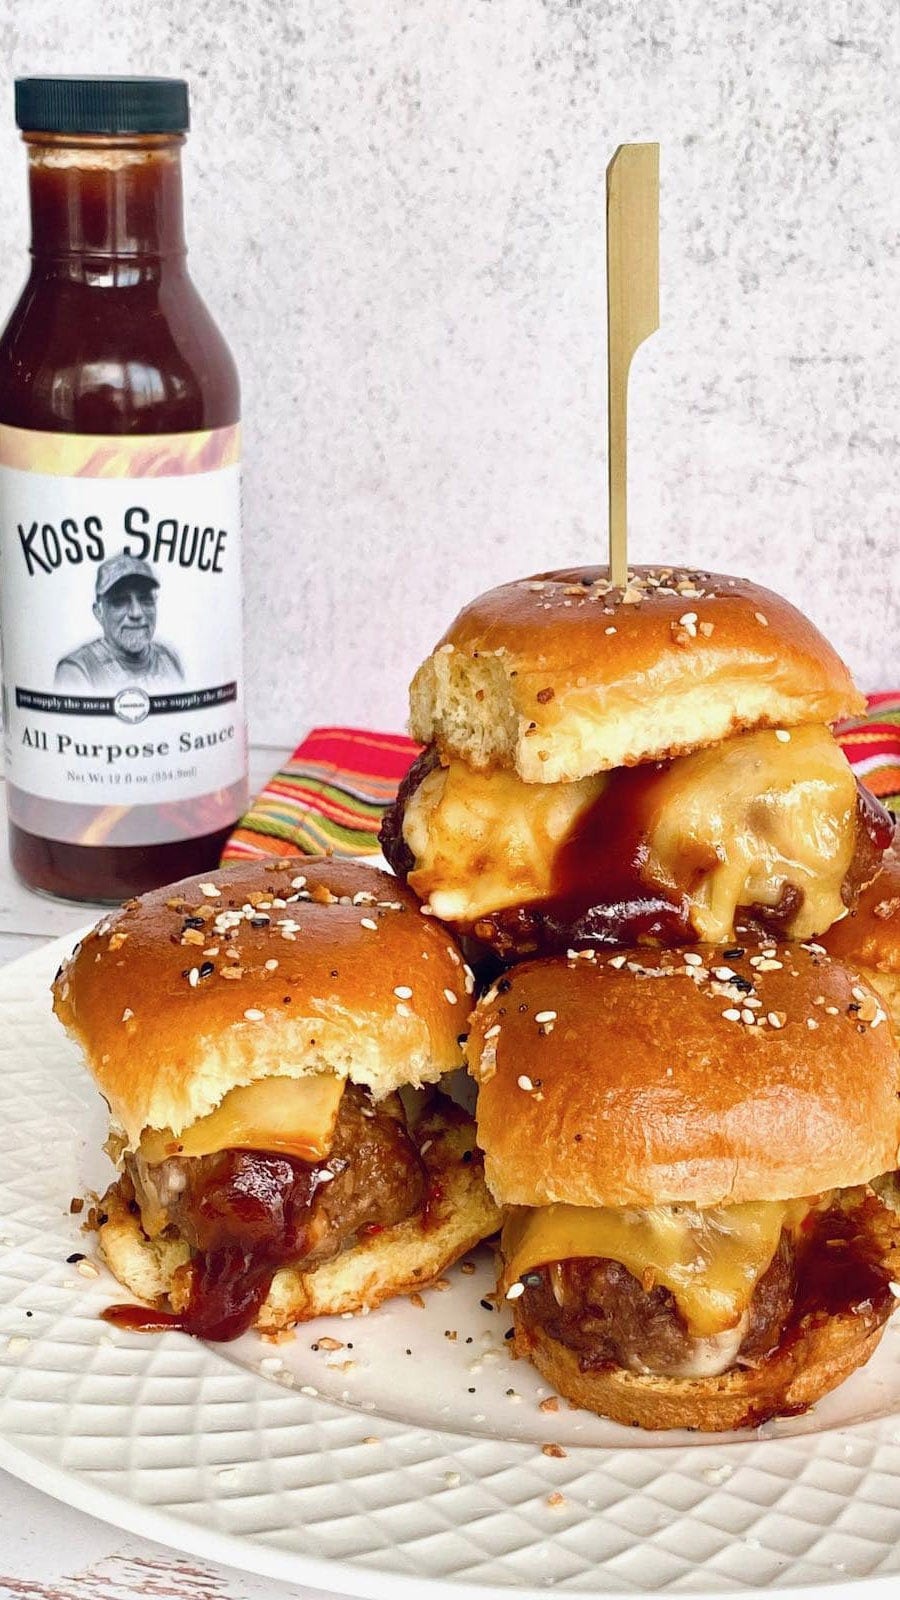 Cheesy meatball sliders with barbecue sauce: Try the recipe